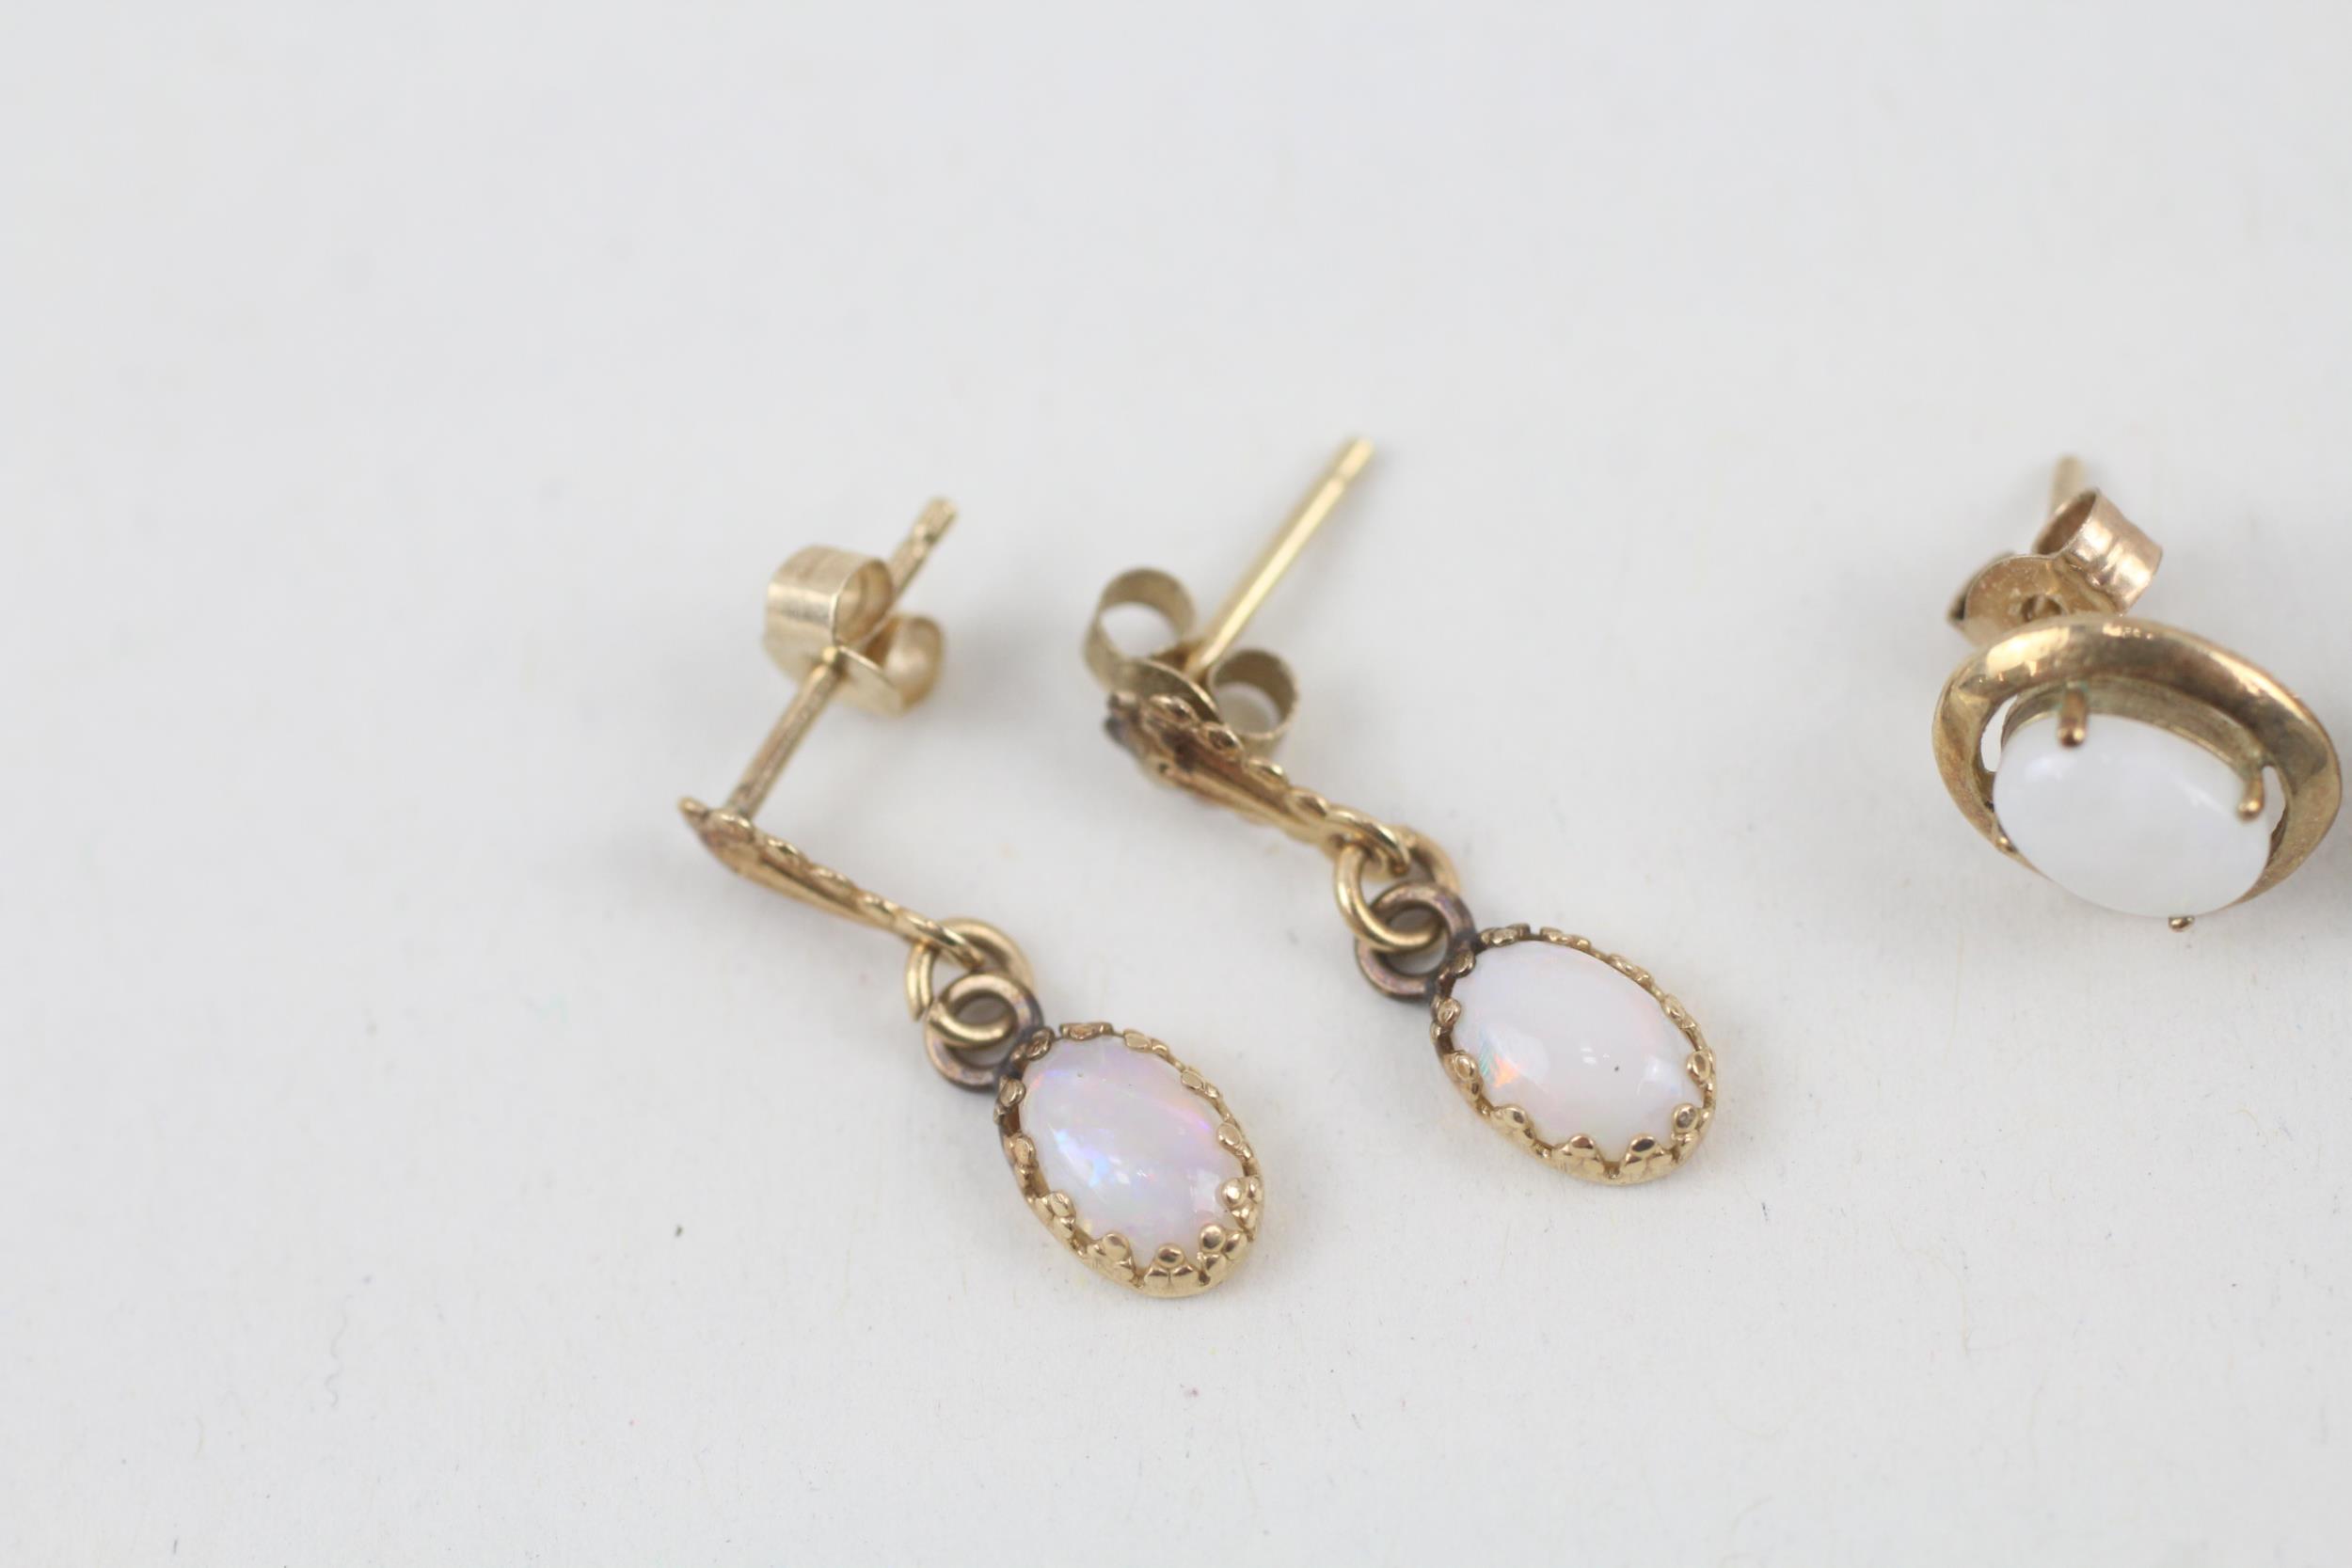 2x 9ct gold opal stud & drop earrings with scroll backs - 1.7 g - Image 2 of 5